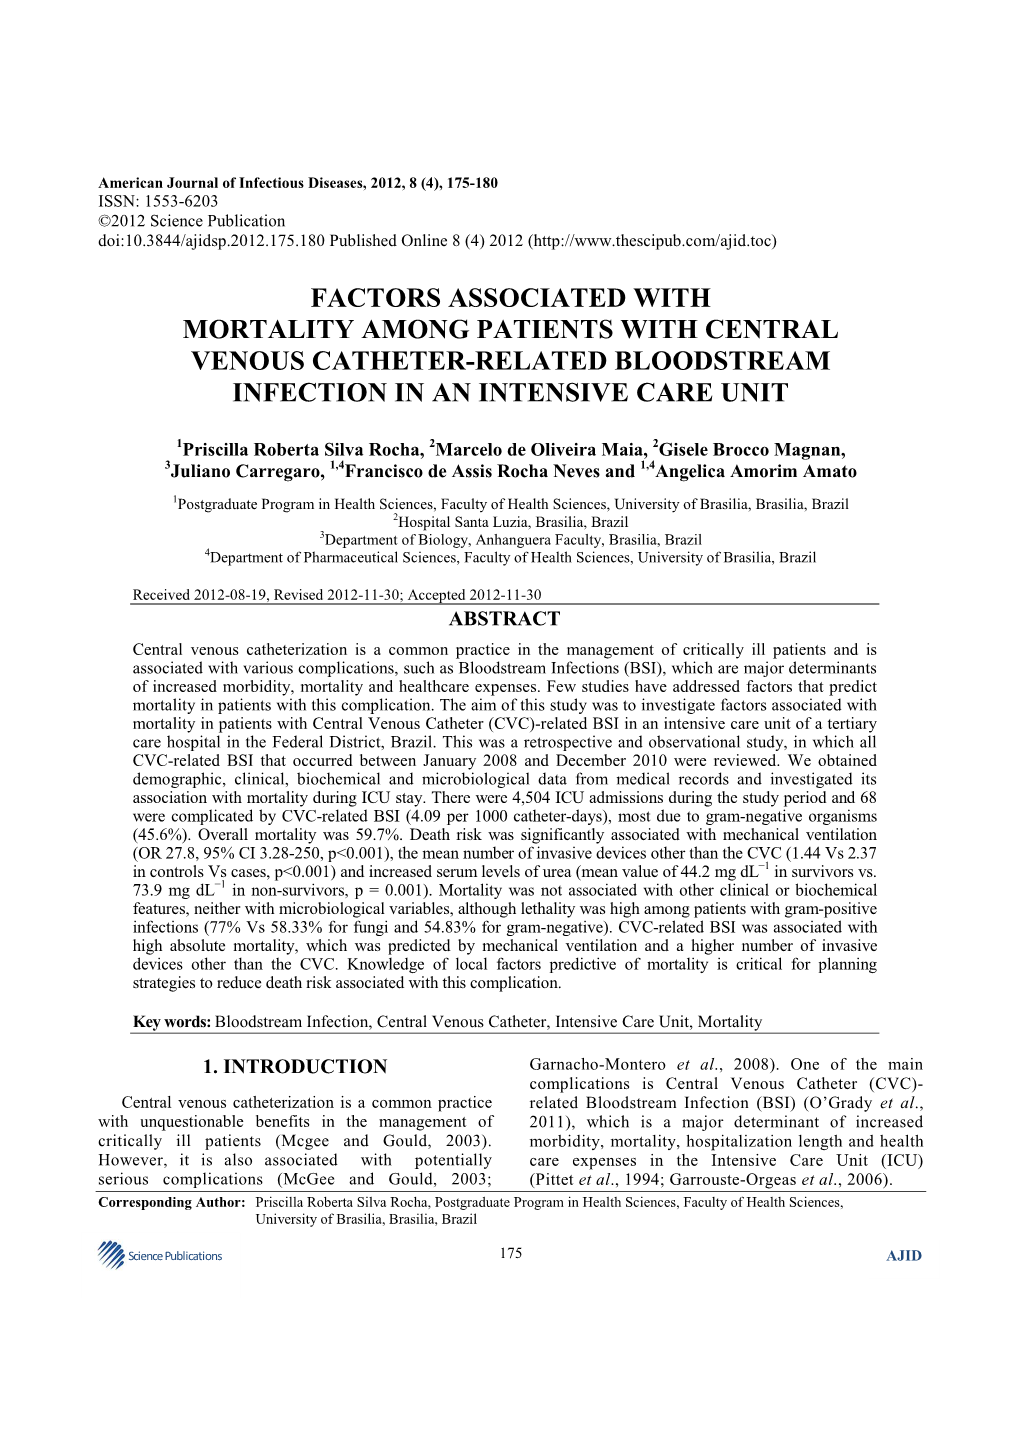 Factors Associated with Mortality Among Patients with Central Venous Catheter-Related Bloodstream Infection in an Intensive Care Unit